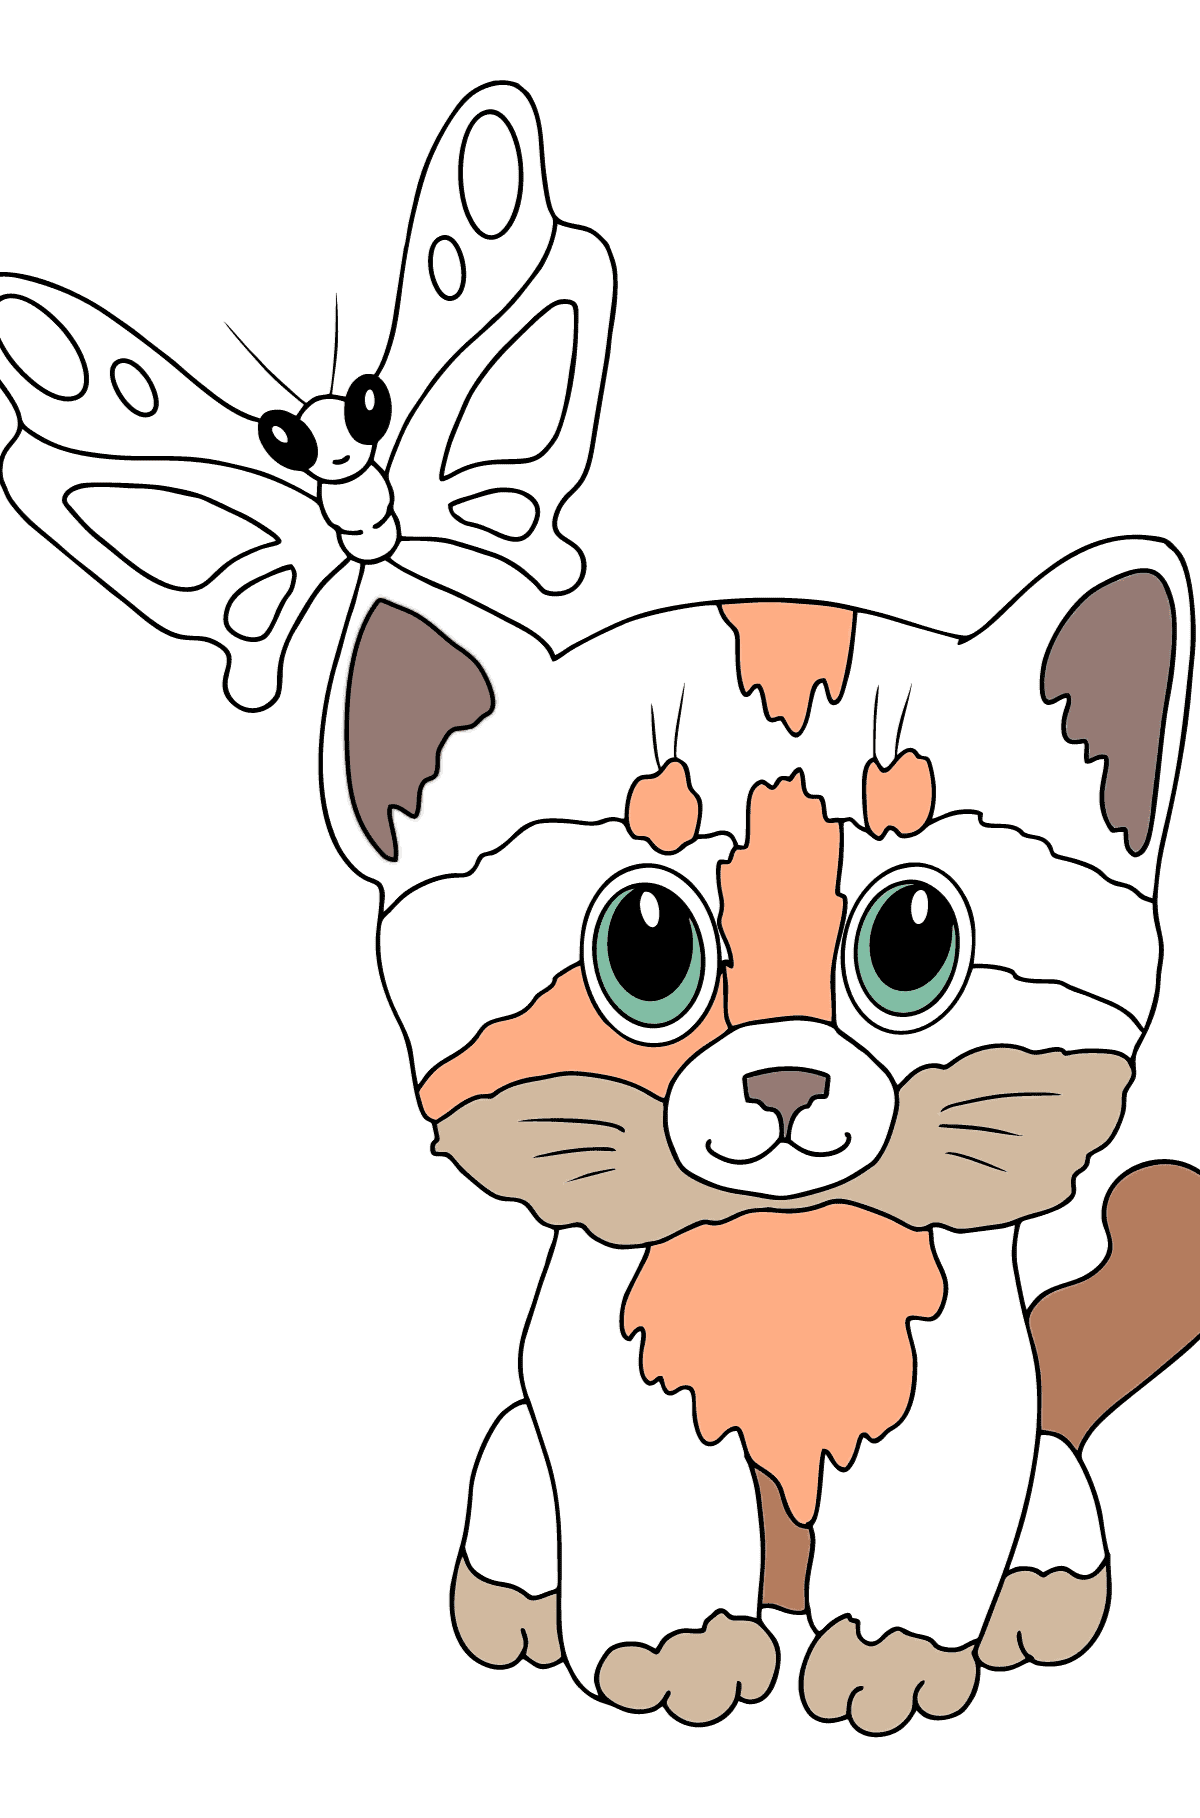 Gentle Kitten coloring page - Coloring Pages for Kids